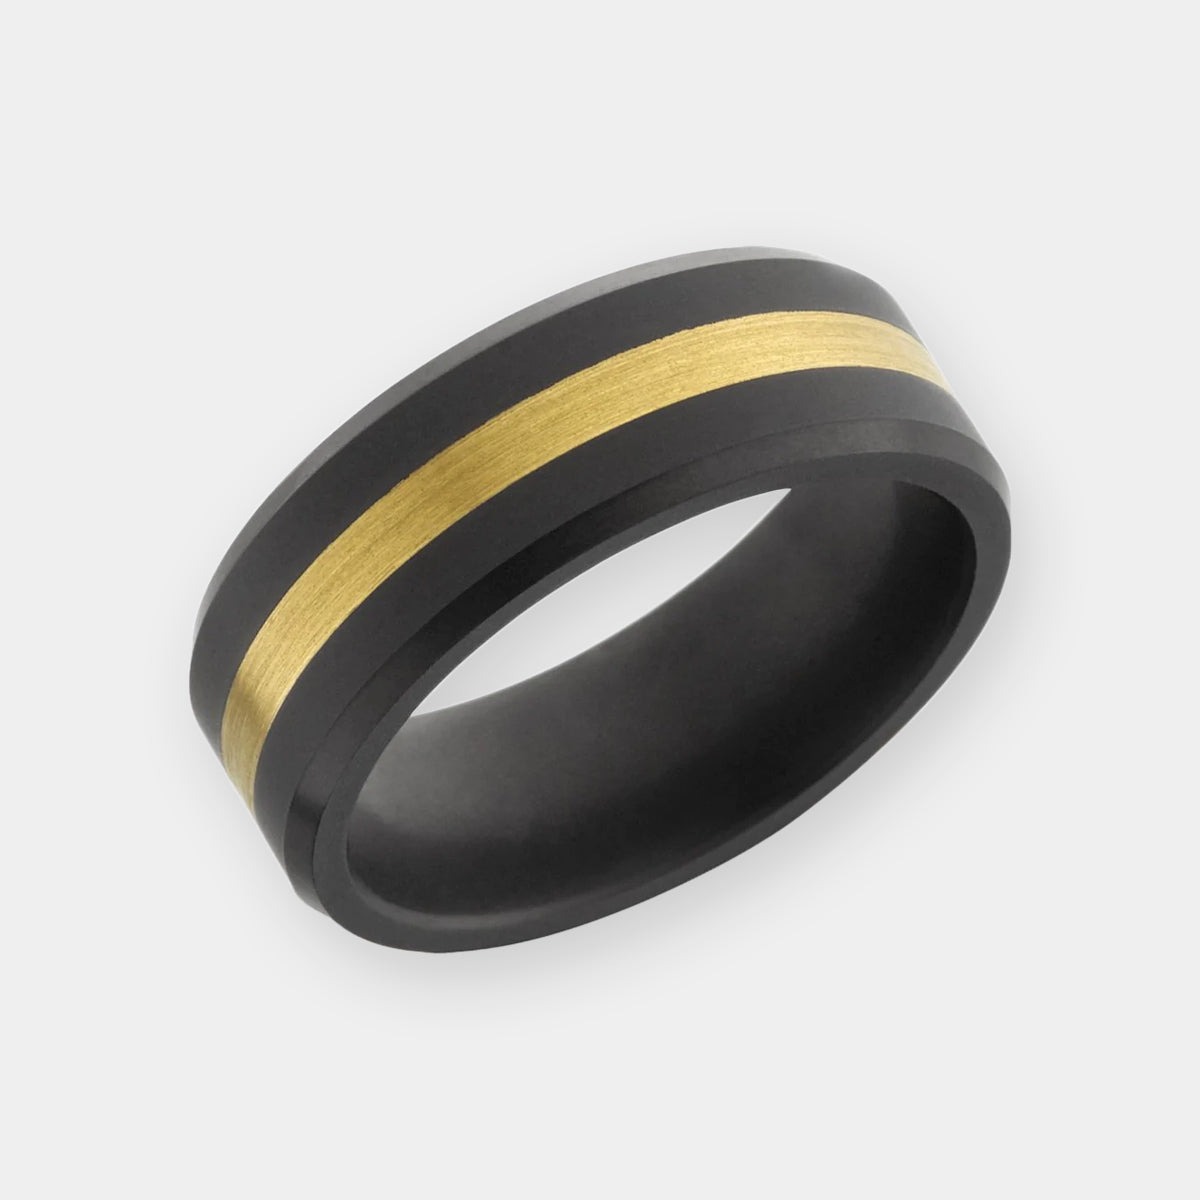 Men's Black Diamond Ring with 14k Yellow Gold Inlay on a white background | Elysium ARES | Men’s 14k Yellow Gold Rings | Men's Gold Wedding Ring